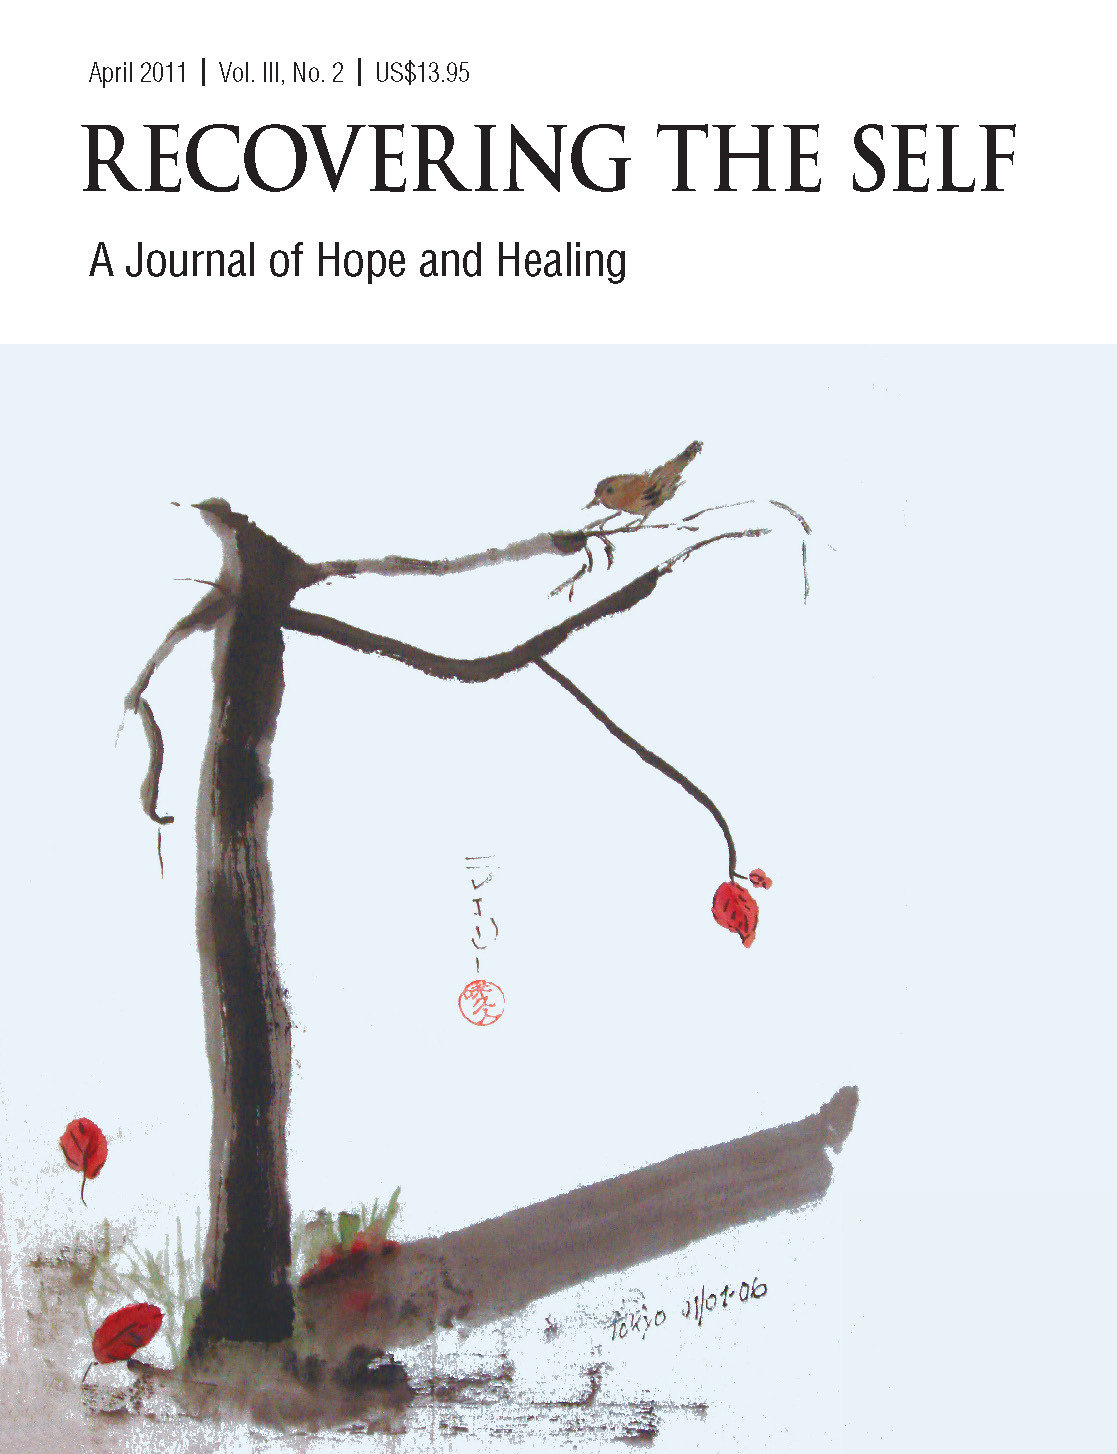 Recovering The Self: A Journal of Hope and Healing (Vol. III, No. 2) -- Focus on Disabilities